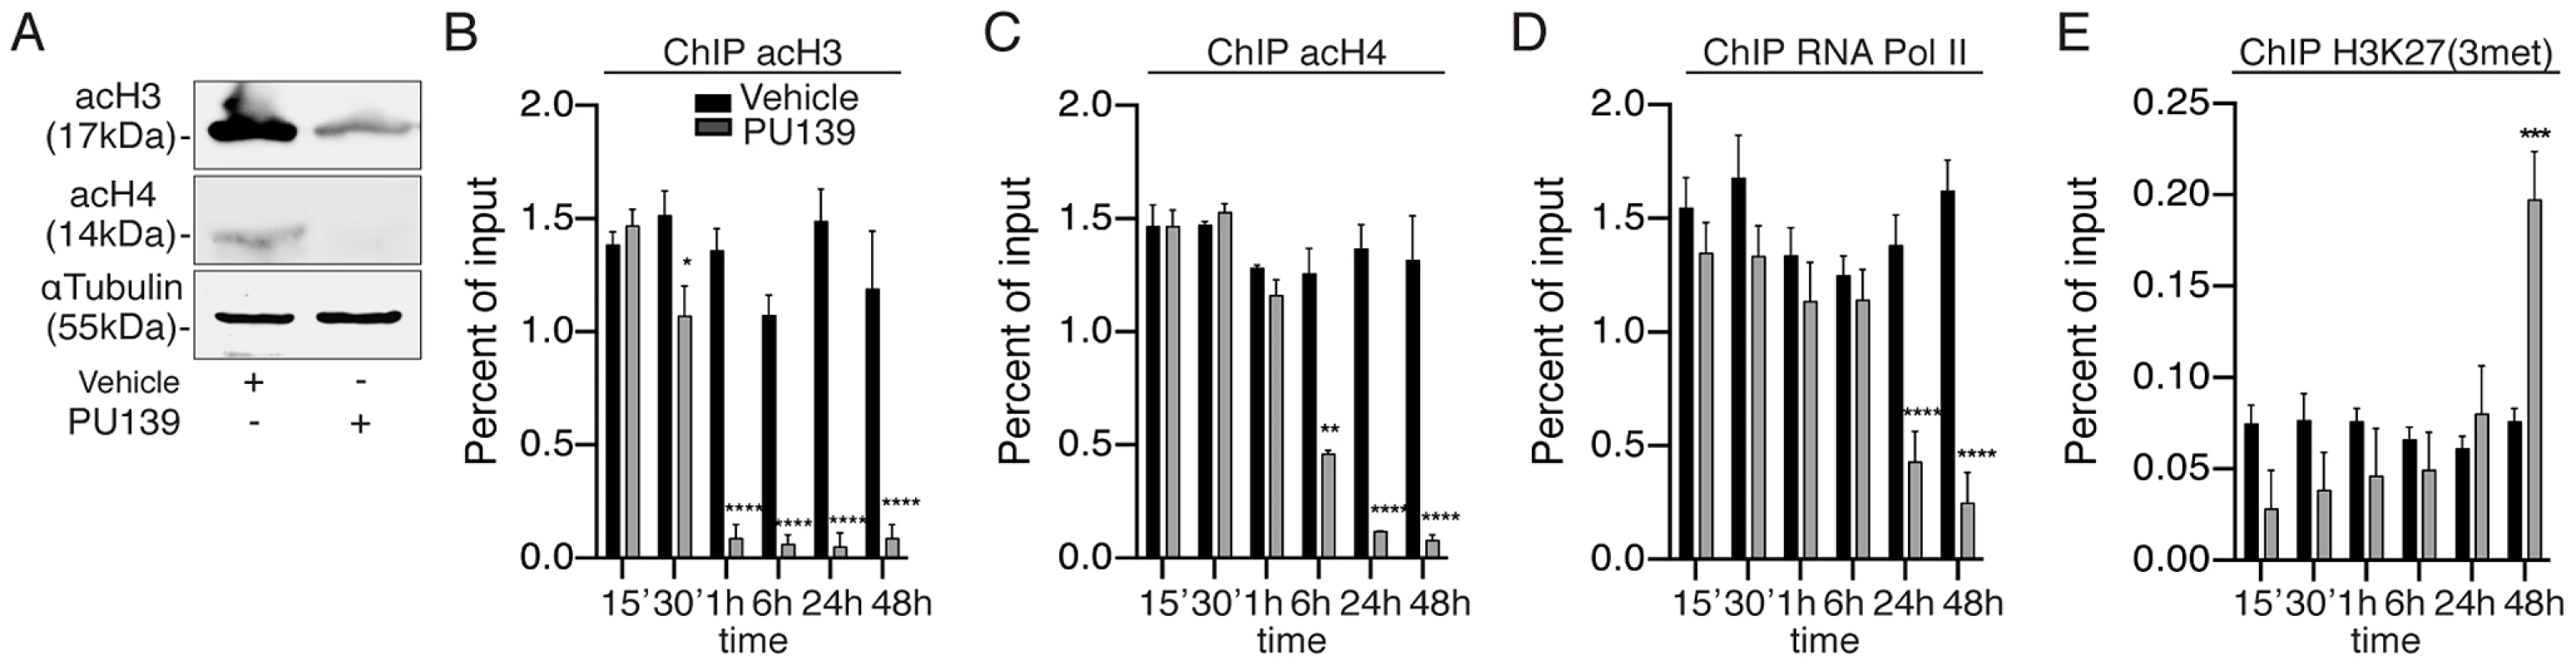 PU139 can reverse histone acetylation, keeping the <i>Smp14</i> promoter in a repressed state.